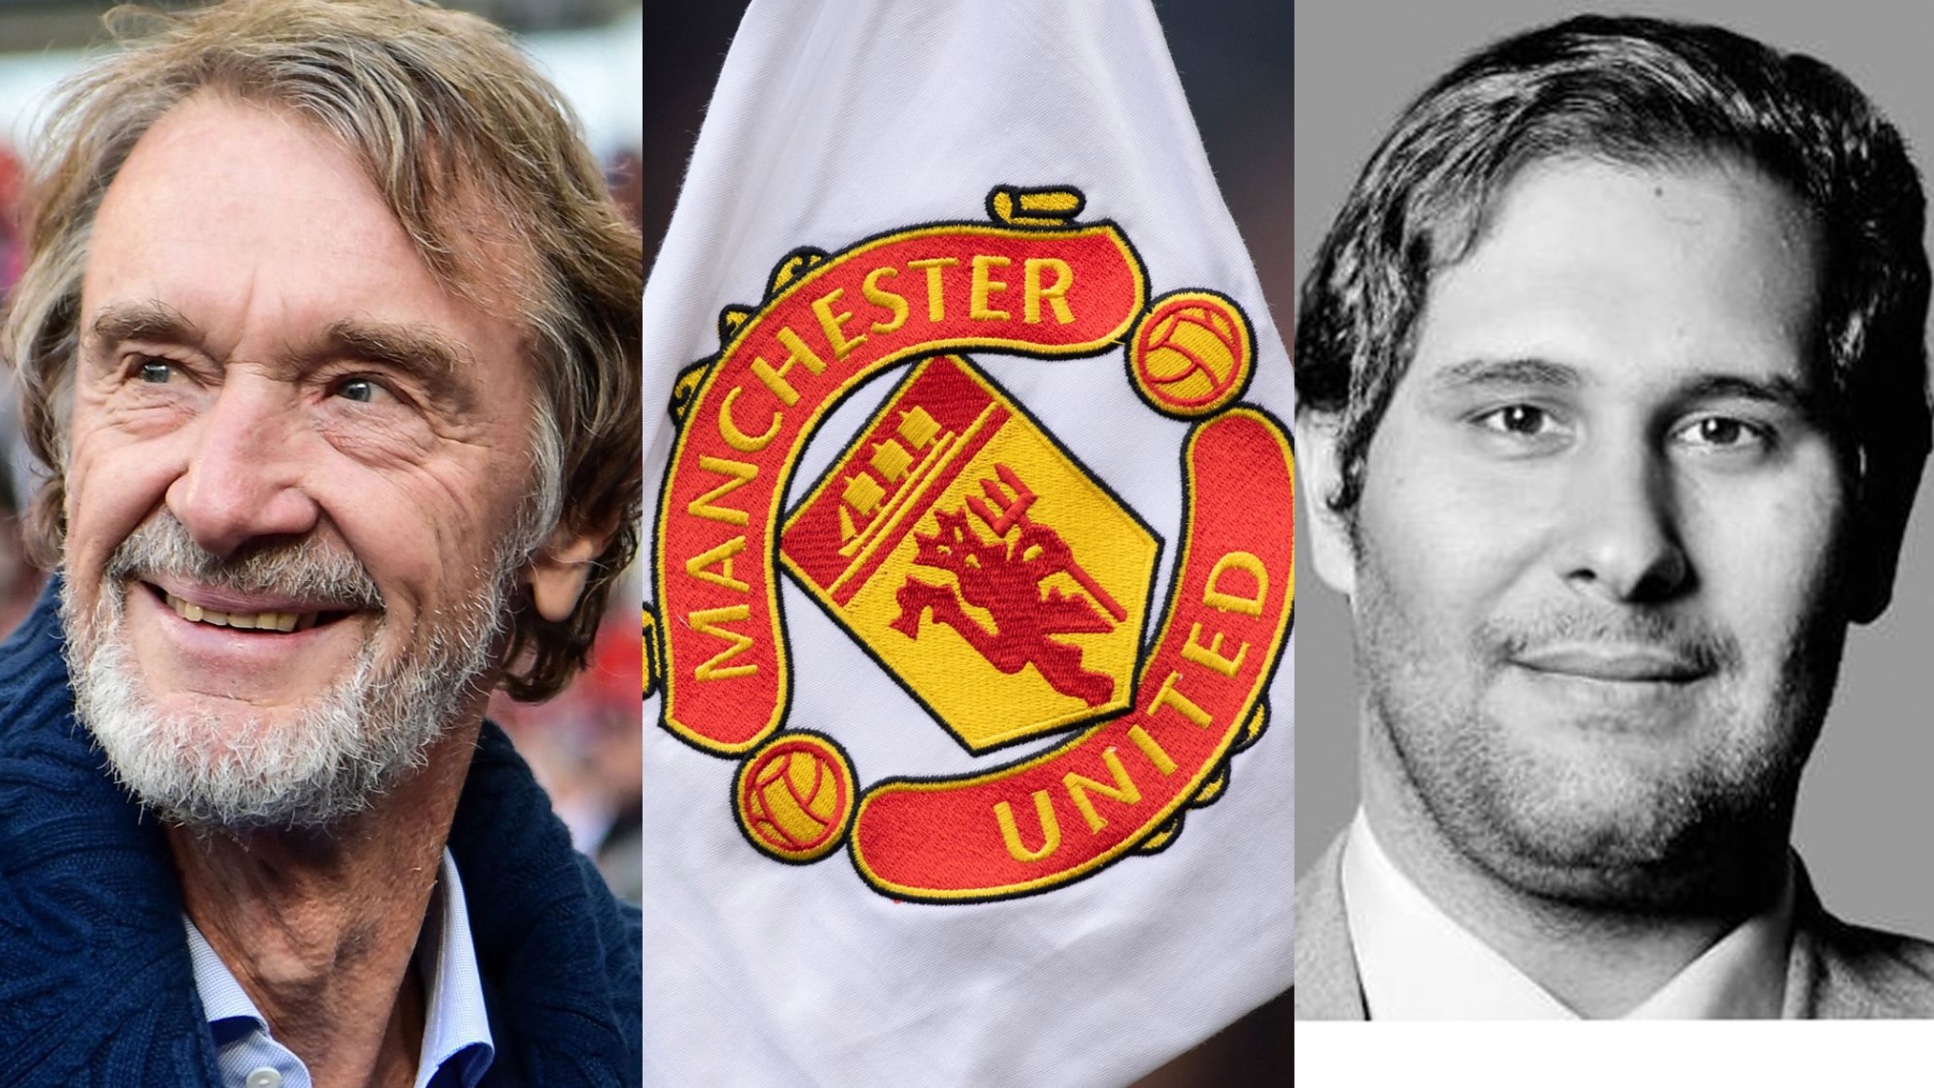 Ben Jacobs provides significant update on Man United takeover CaughtOffside